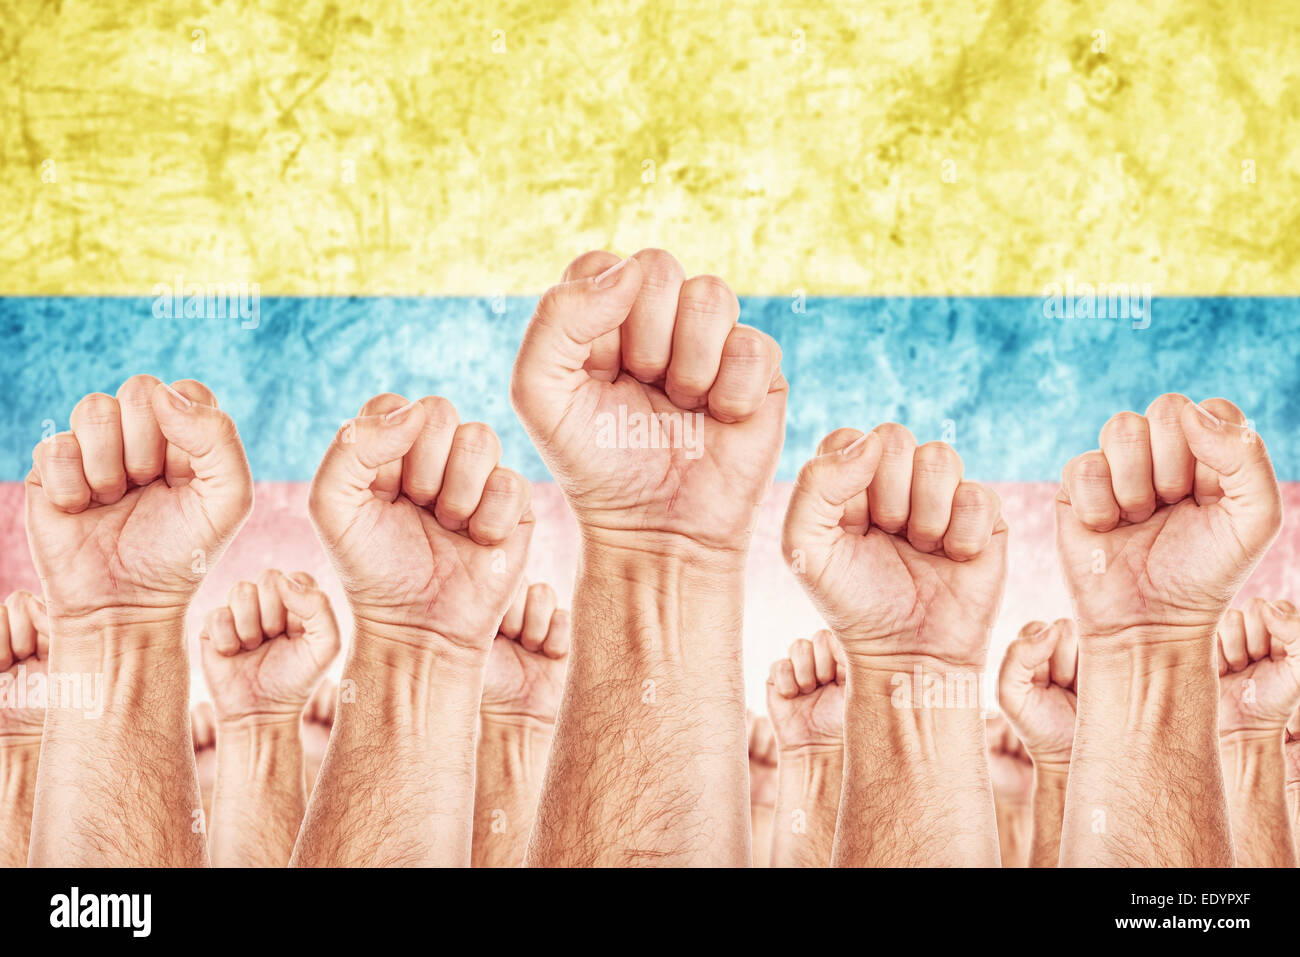 Columbia Labor movement, workers union strike concept with male fists raised in the air fighting for their rights Stock Photo